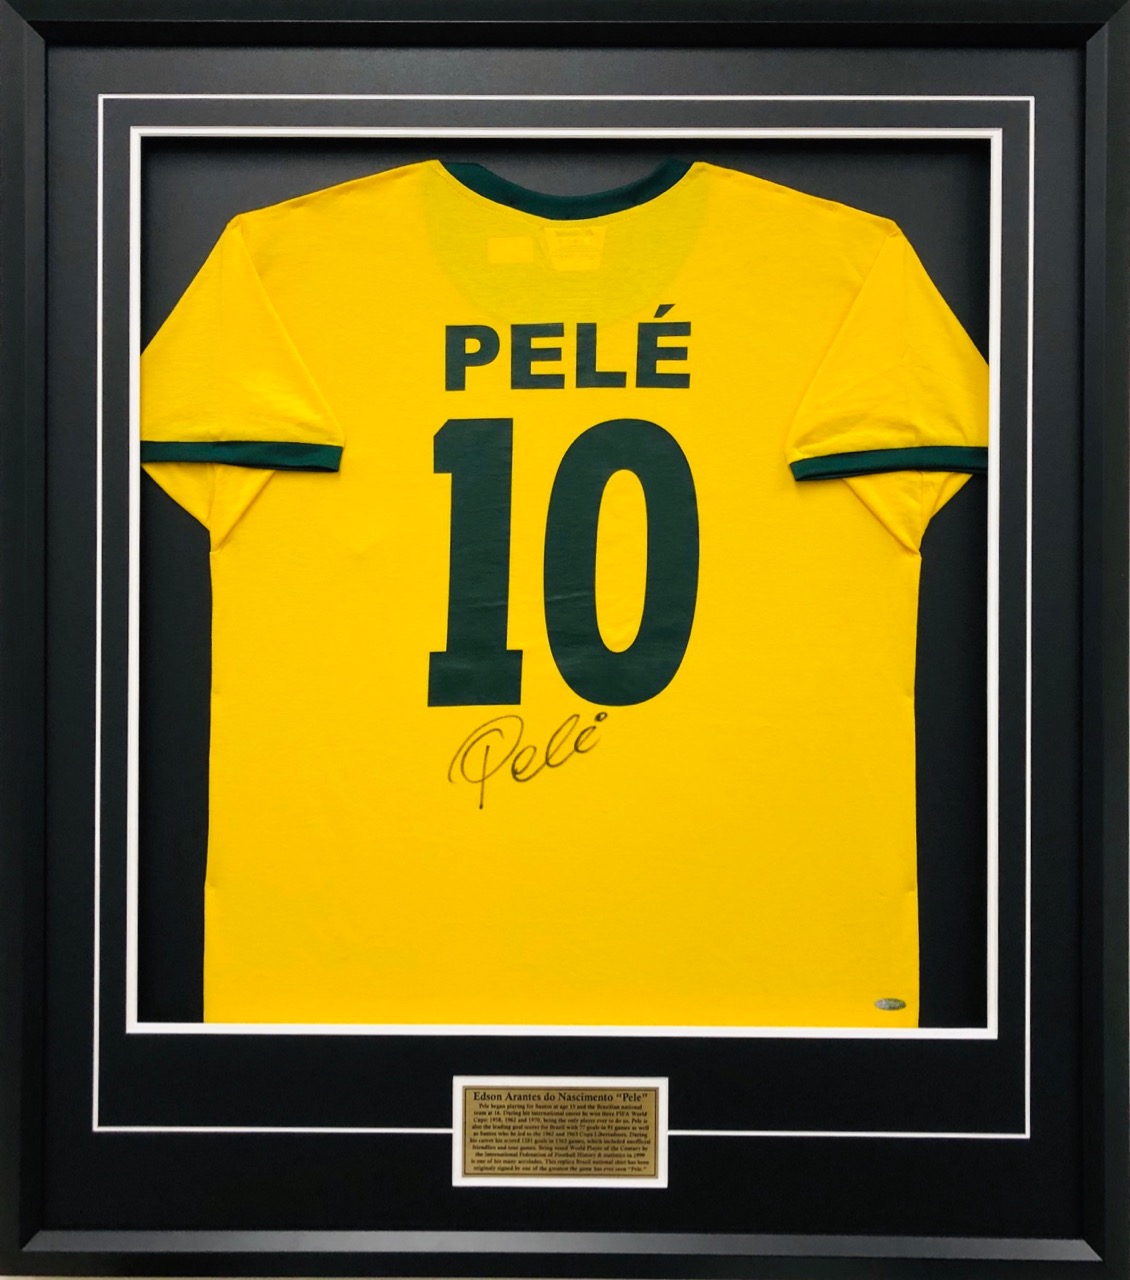 RaRe EDSON PELE SIGNED BRAZIL SHIRT FROM OUR OWN SIGNING comes with our coa £175 